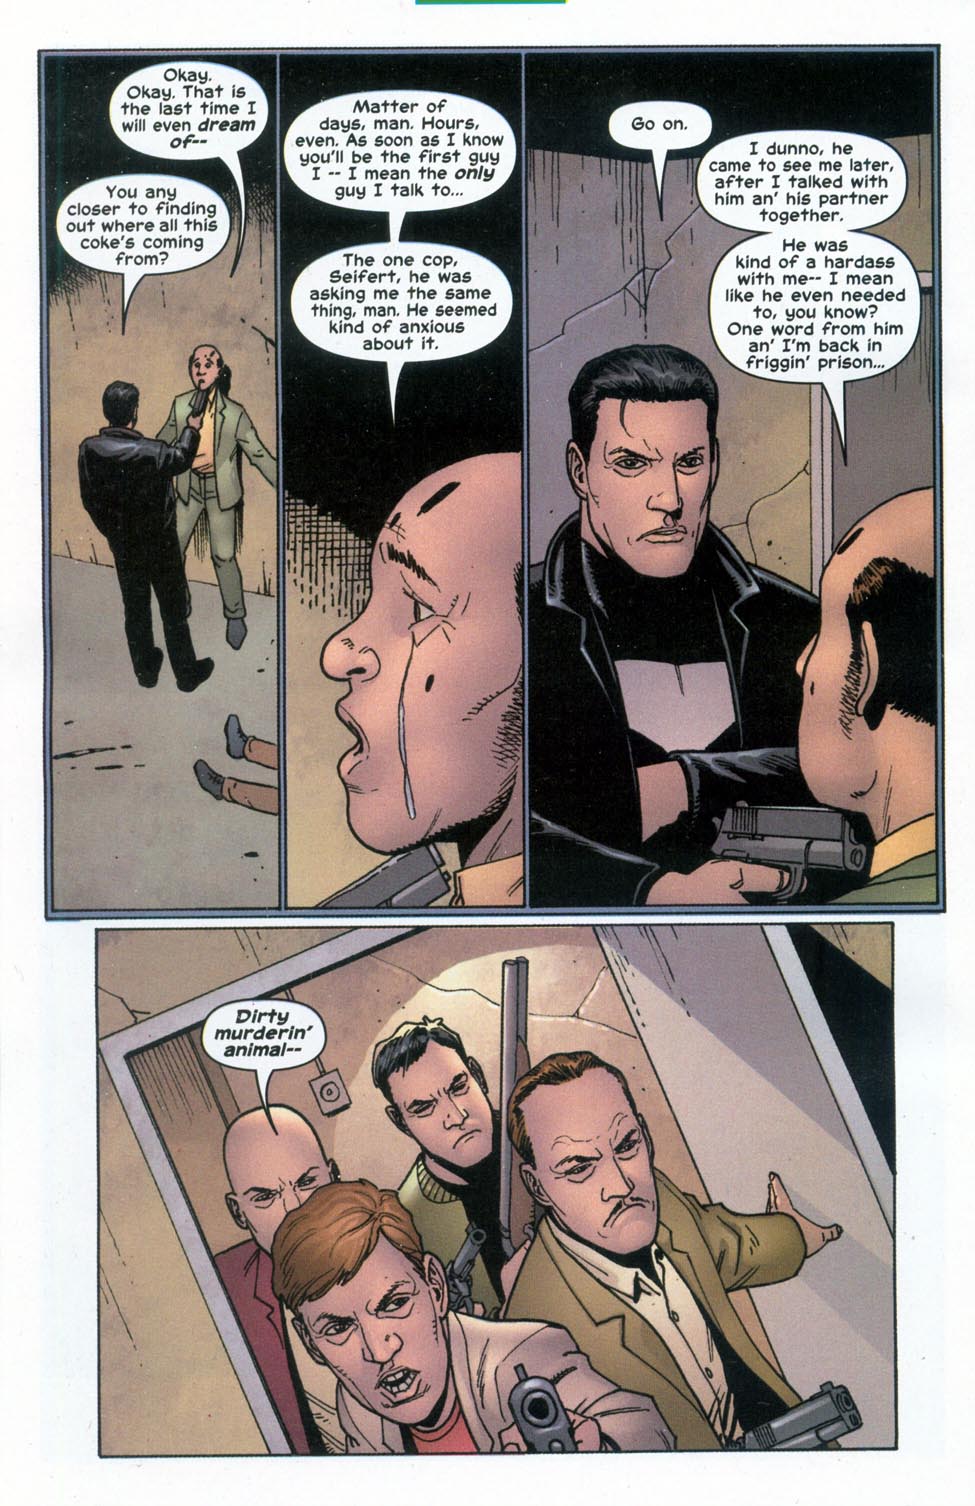 The Punisher (2001) issue 20 - Brotherhood #01 - Page 16